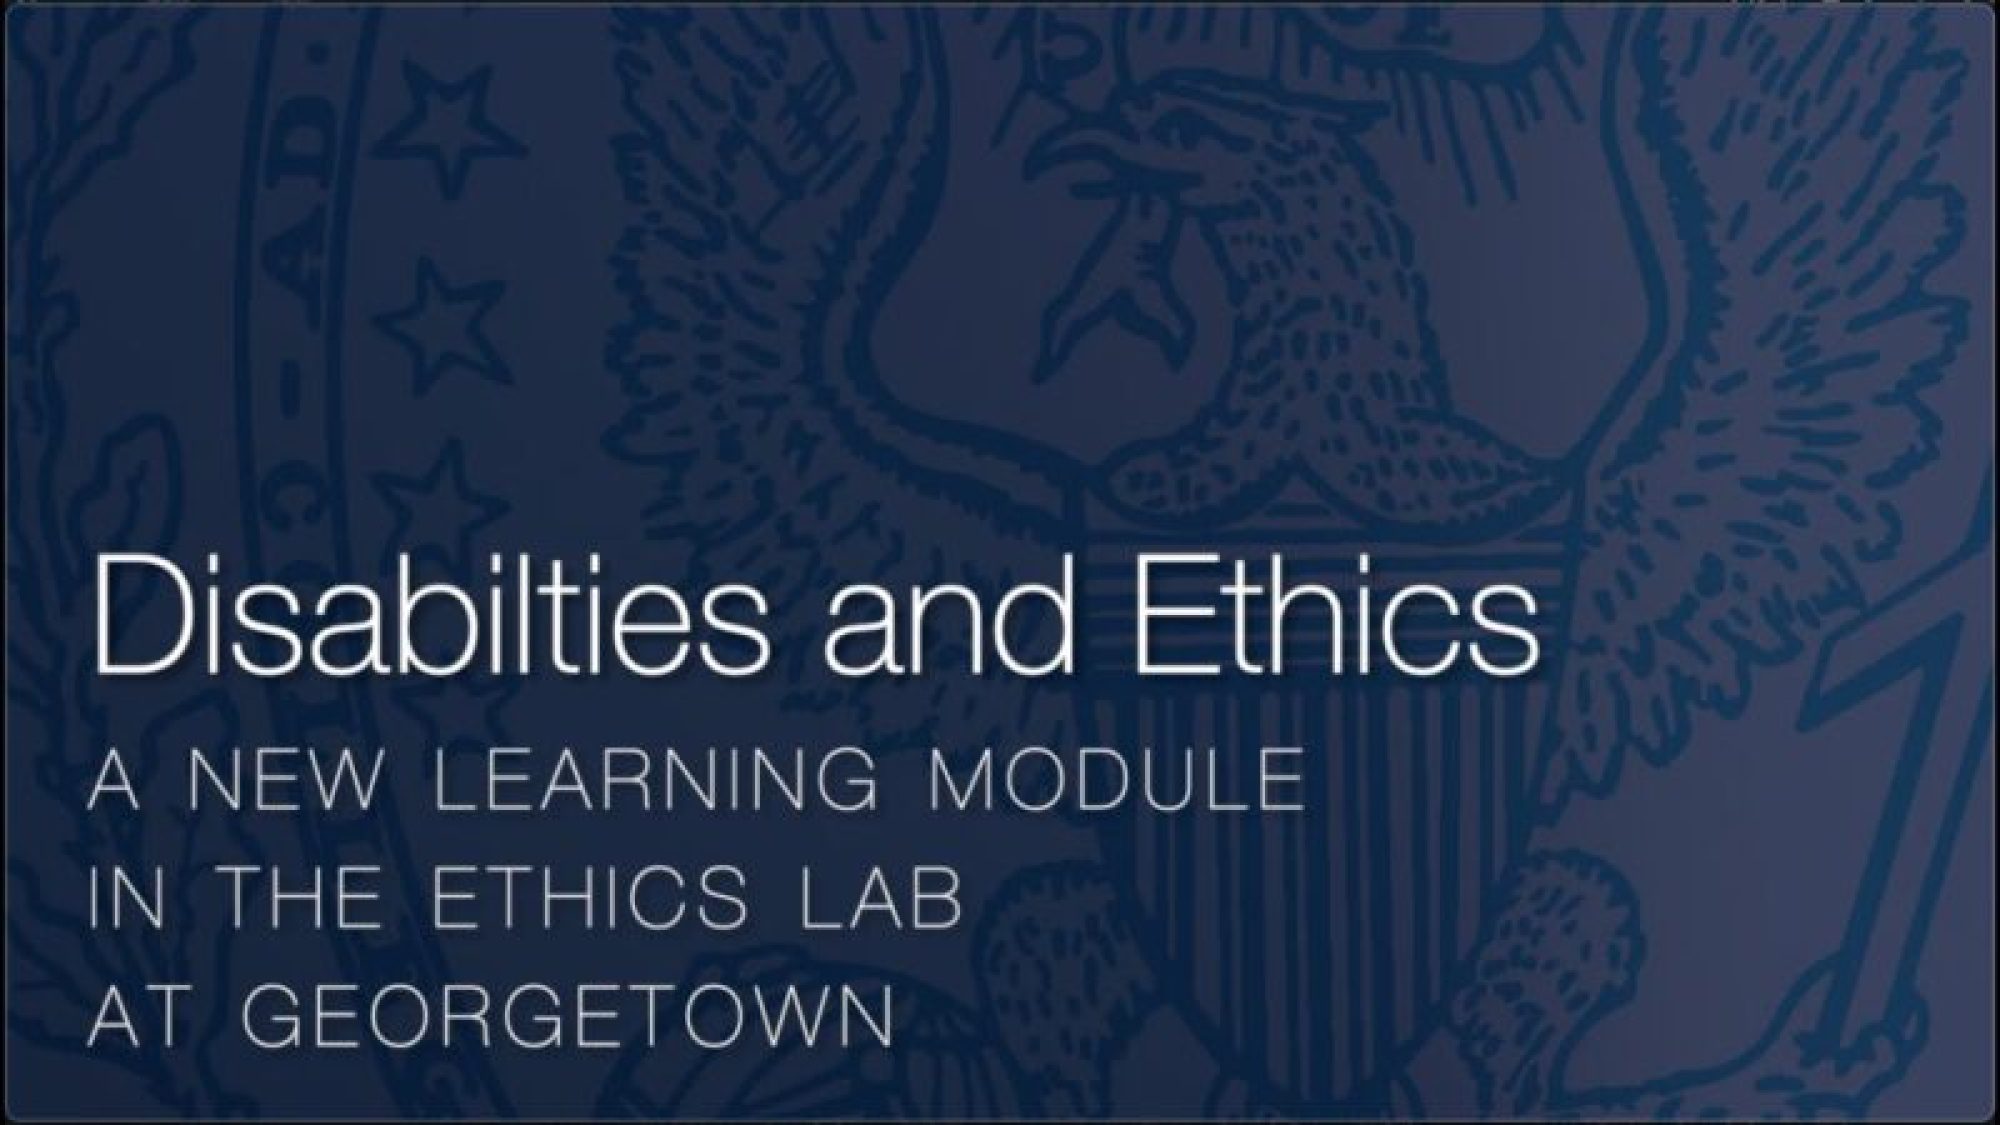 Text &quot;Disabilities and Ethics a New Learning Module in the Ethics Lab at Georgetown&quot; on Georgetown seal background